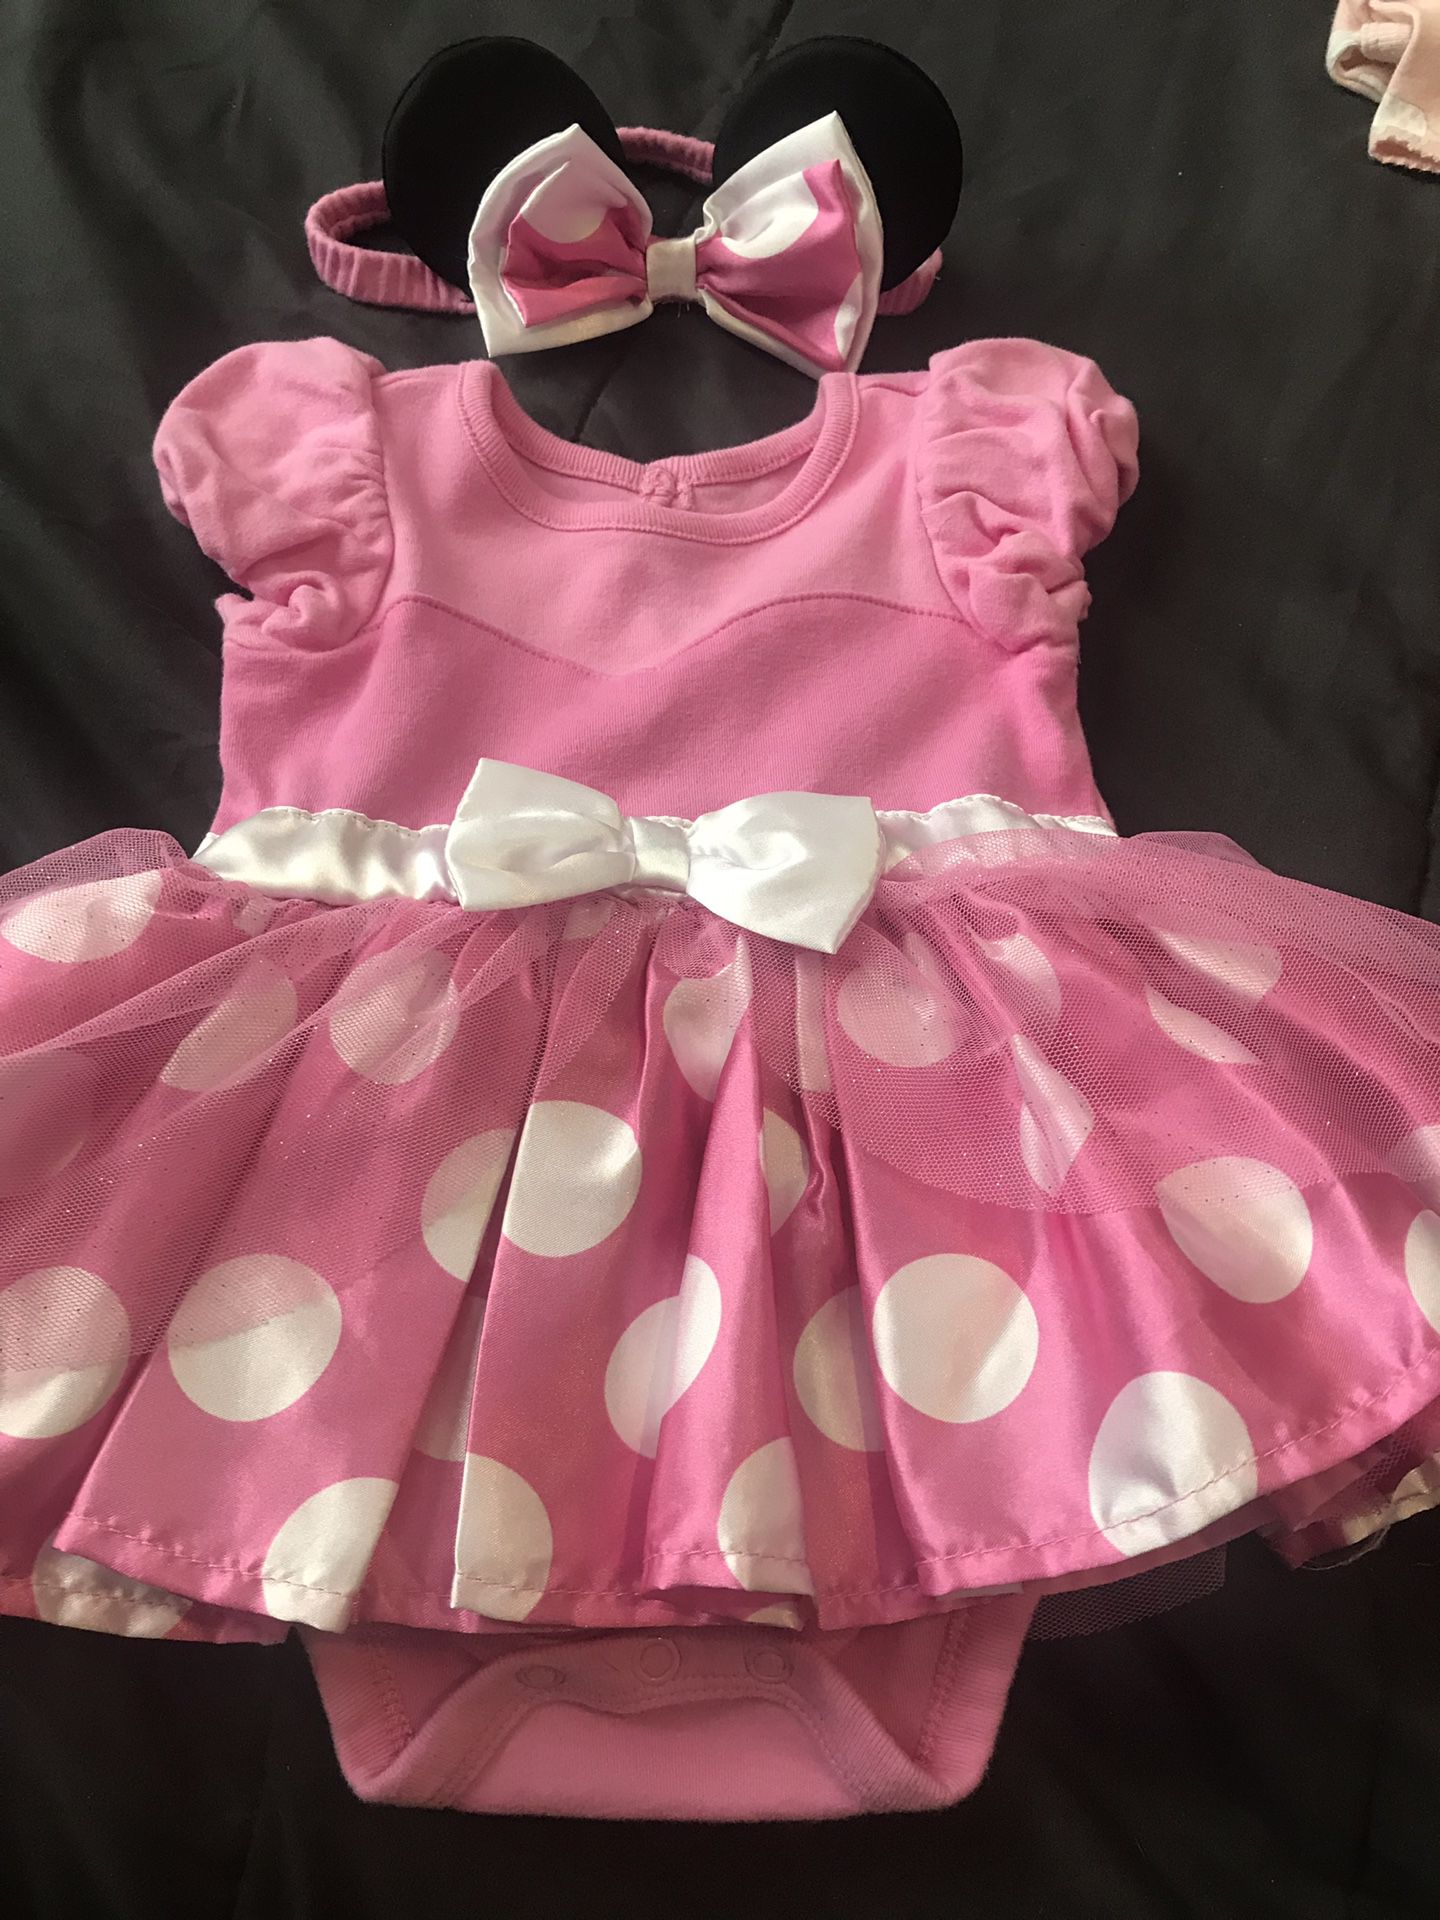 Minnie Mouse Costume/outfit w/ matching shoes